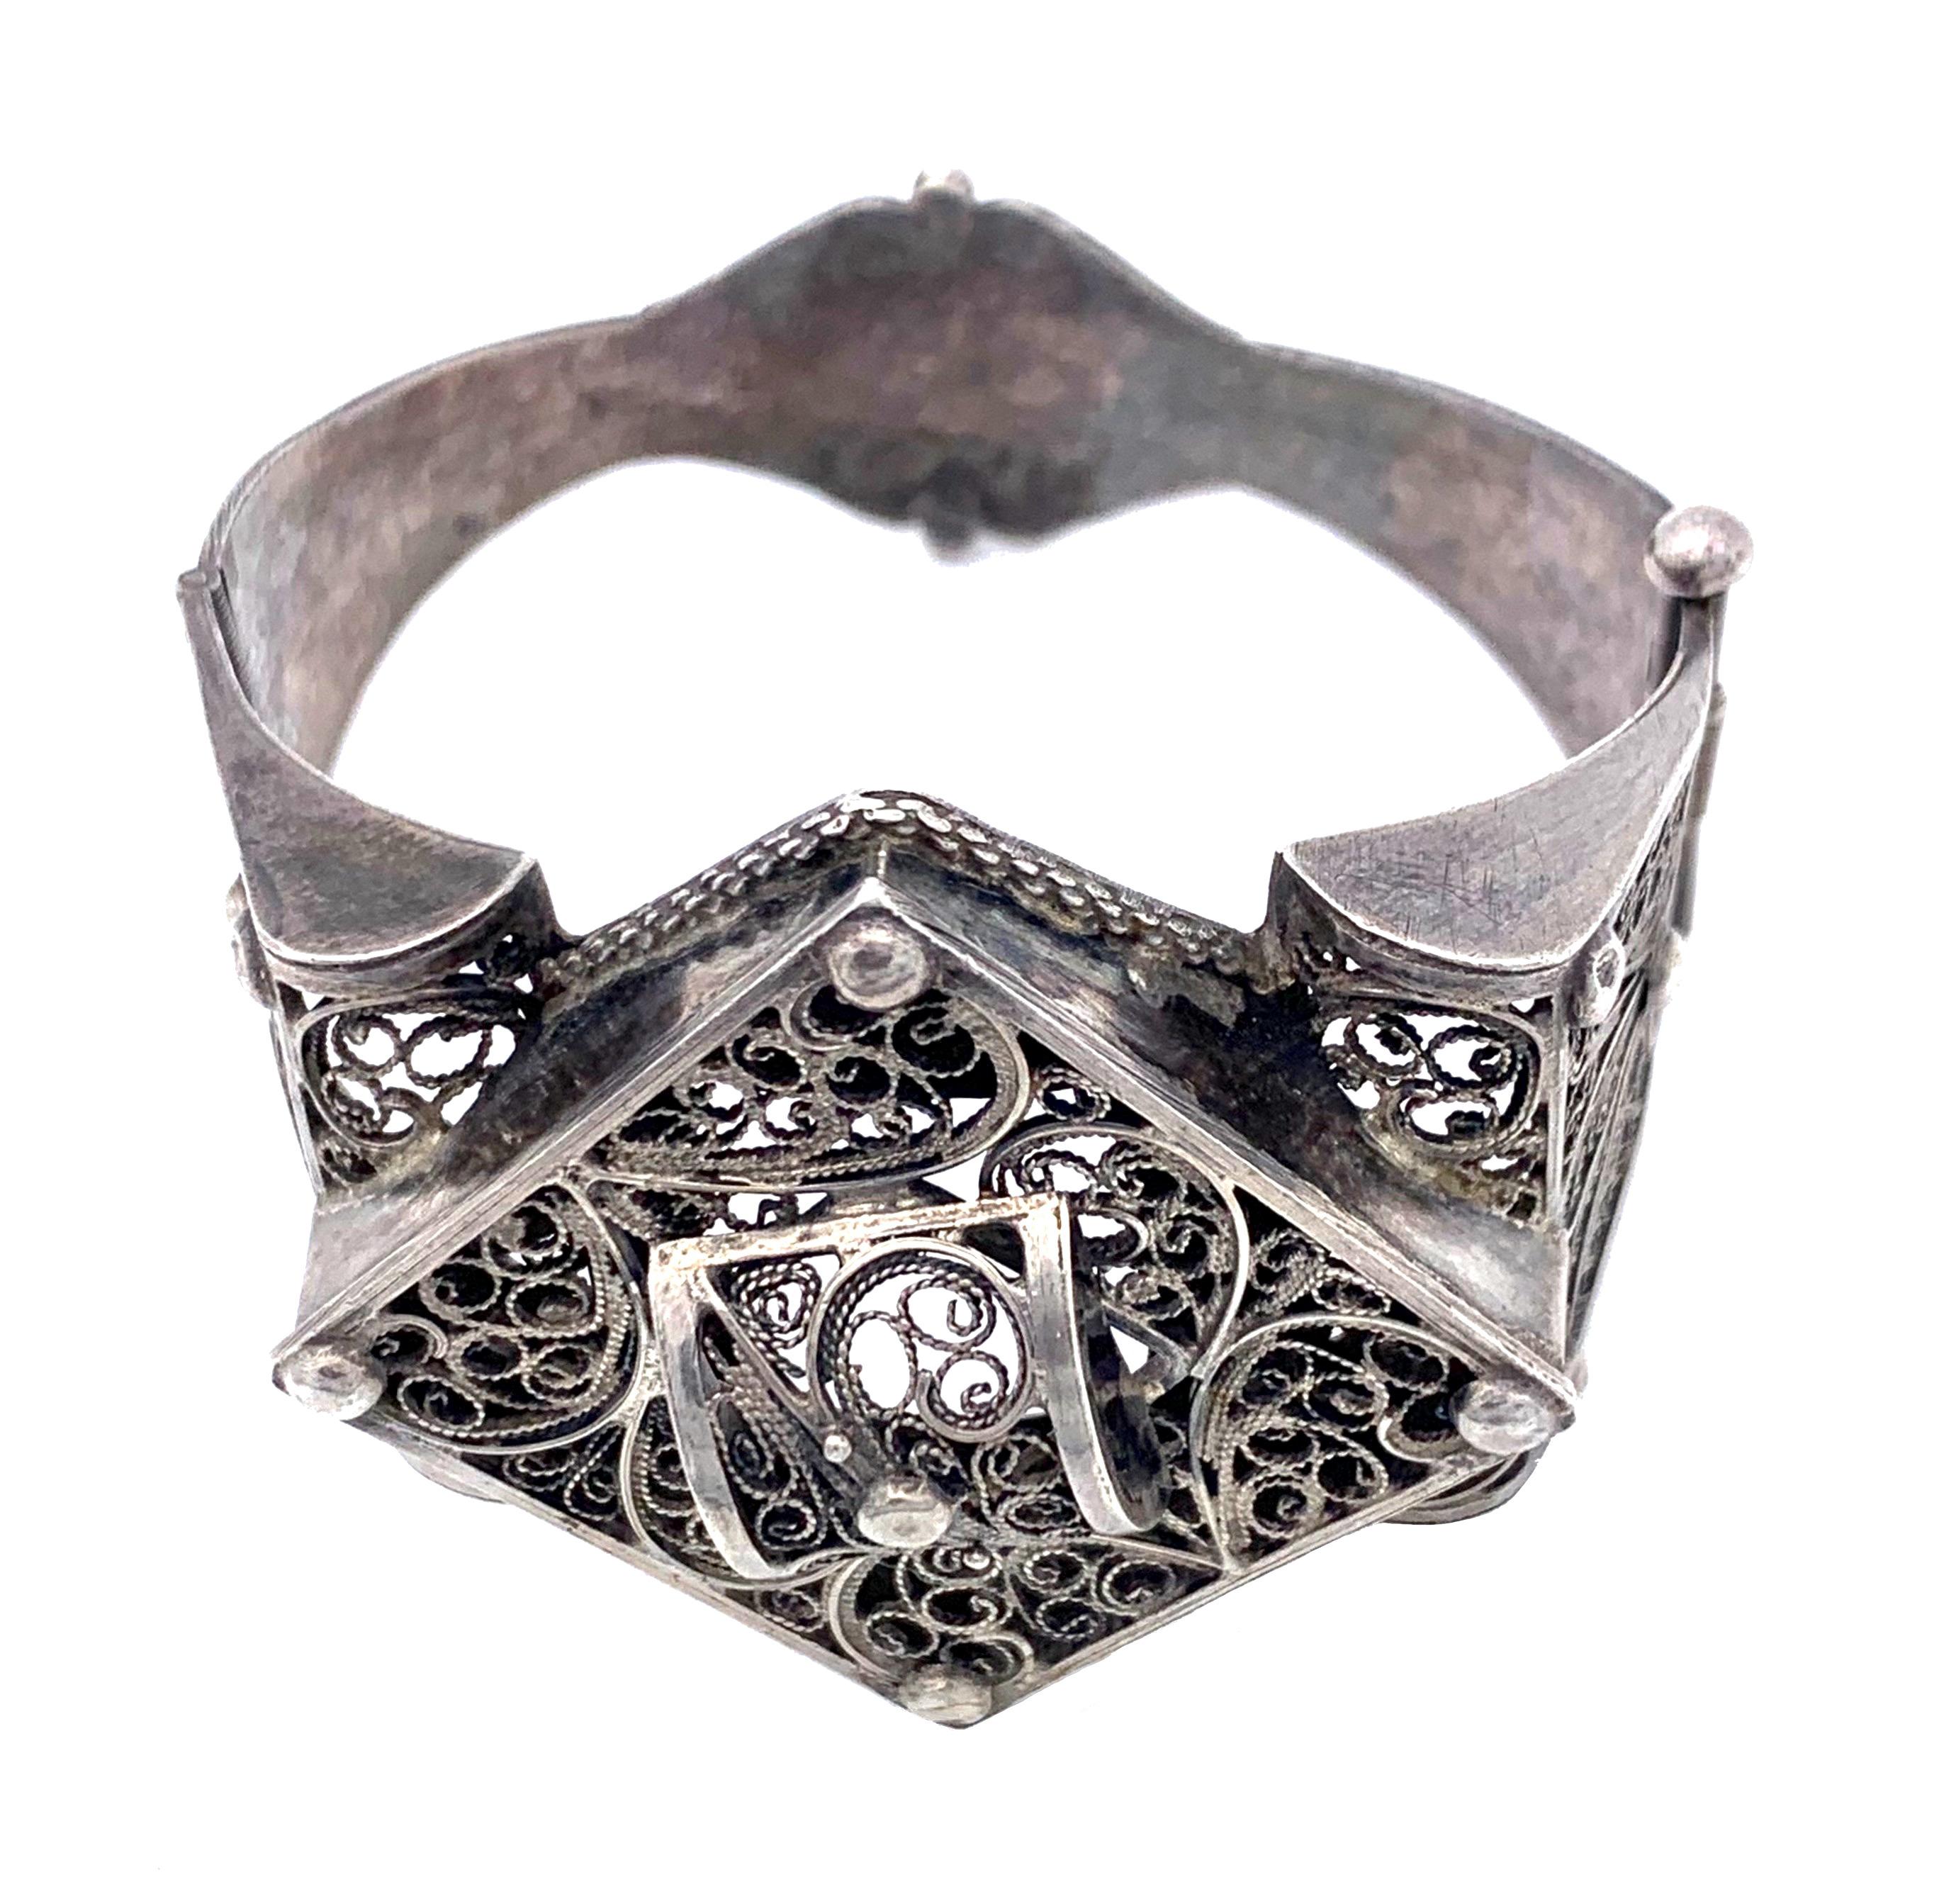 This exquisitely worked silver bracelet has been handcrafted in North Africa around 1920. A square silver frame is decorated with openwork silver wire scrolls.The bracelet is in fine original condition.   